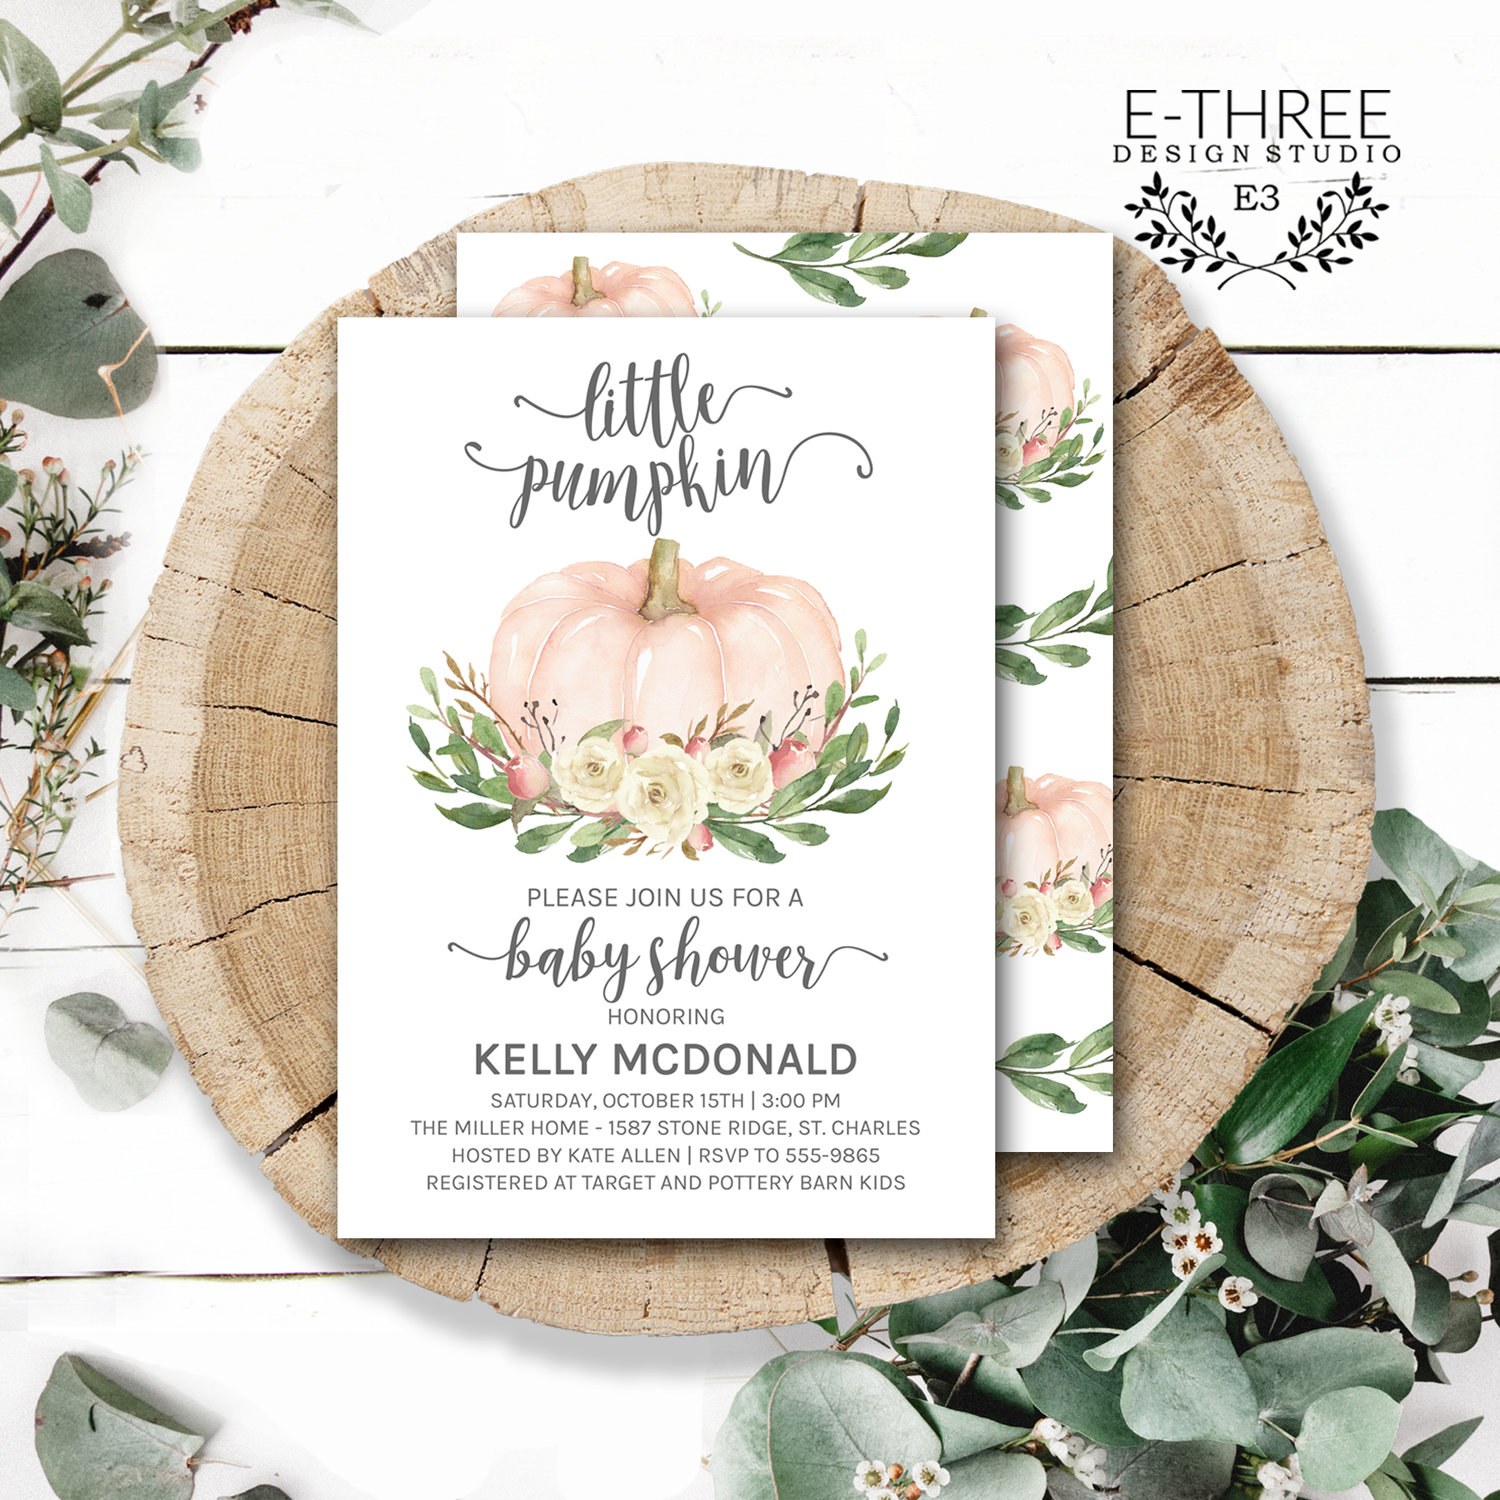 Pastel Pumpkins Invitations Party Supplies Collection - PARTY